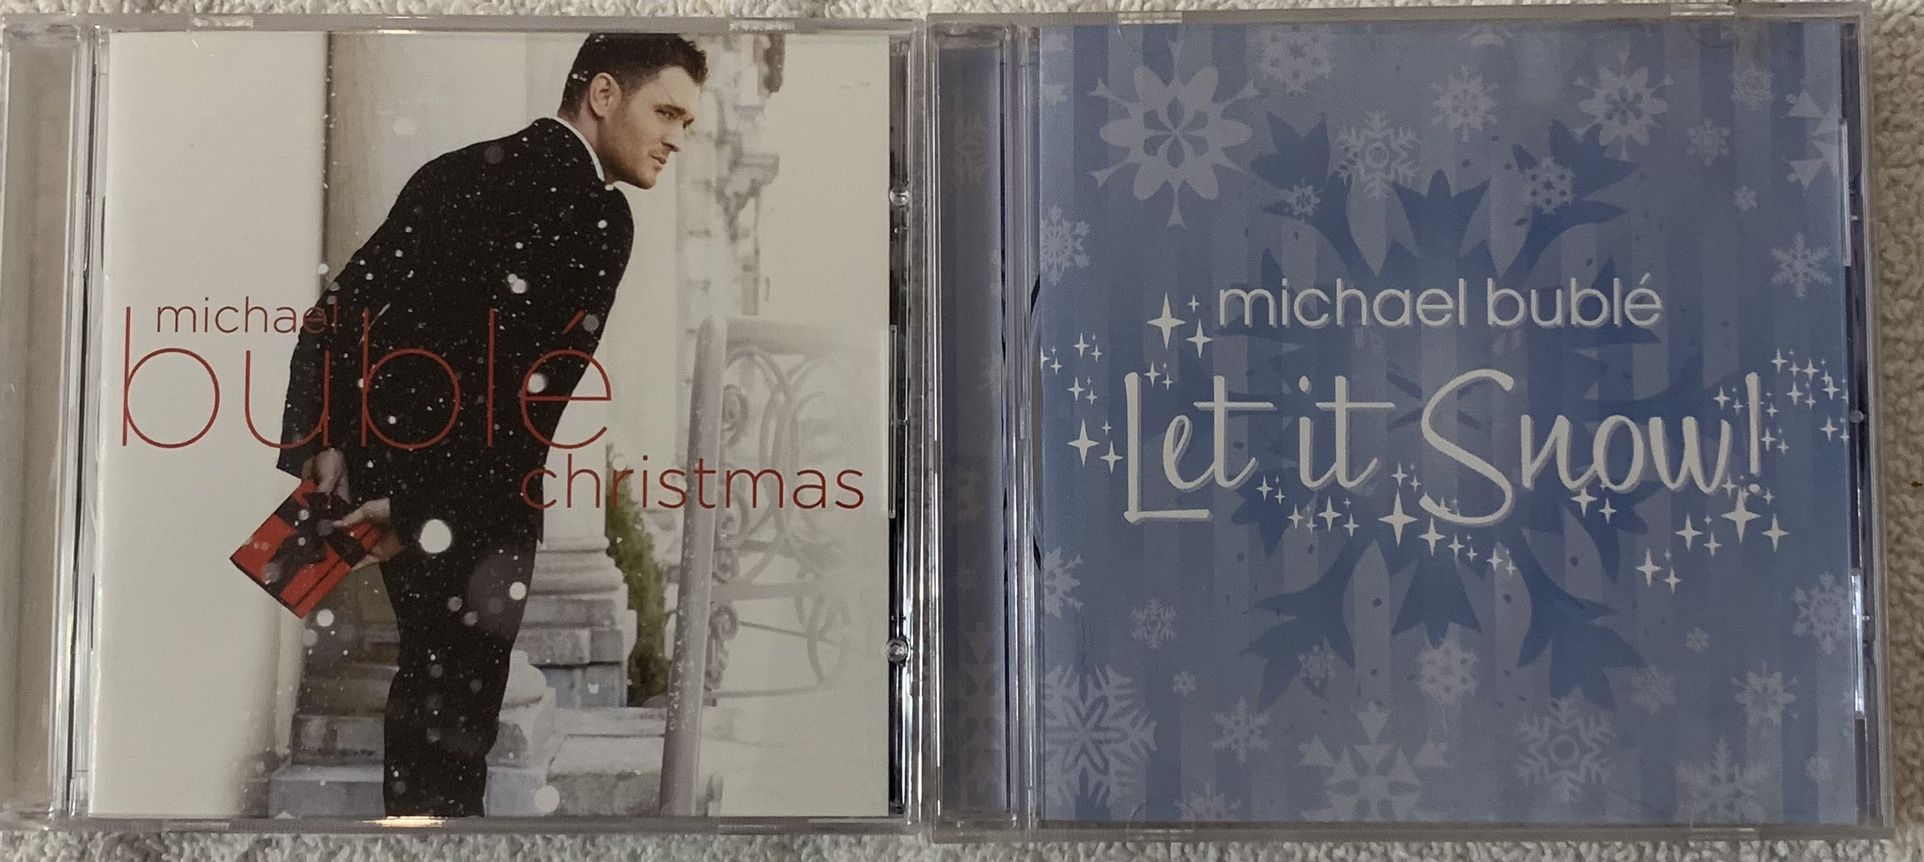 Michael Bublé Christmas & Let it Snow! Holiday Albums (2) Total CDs